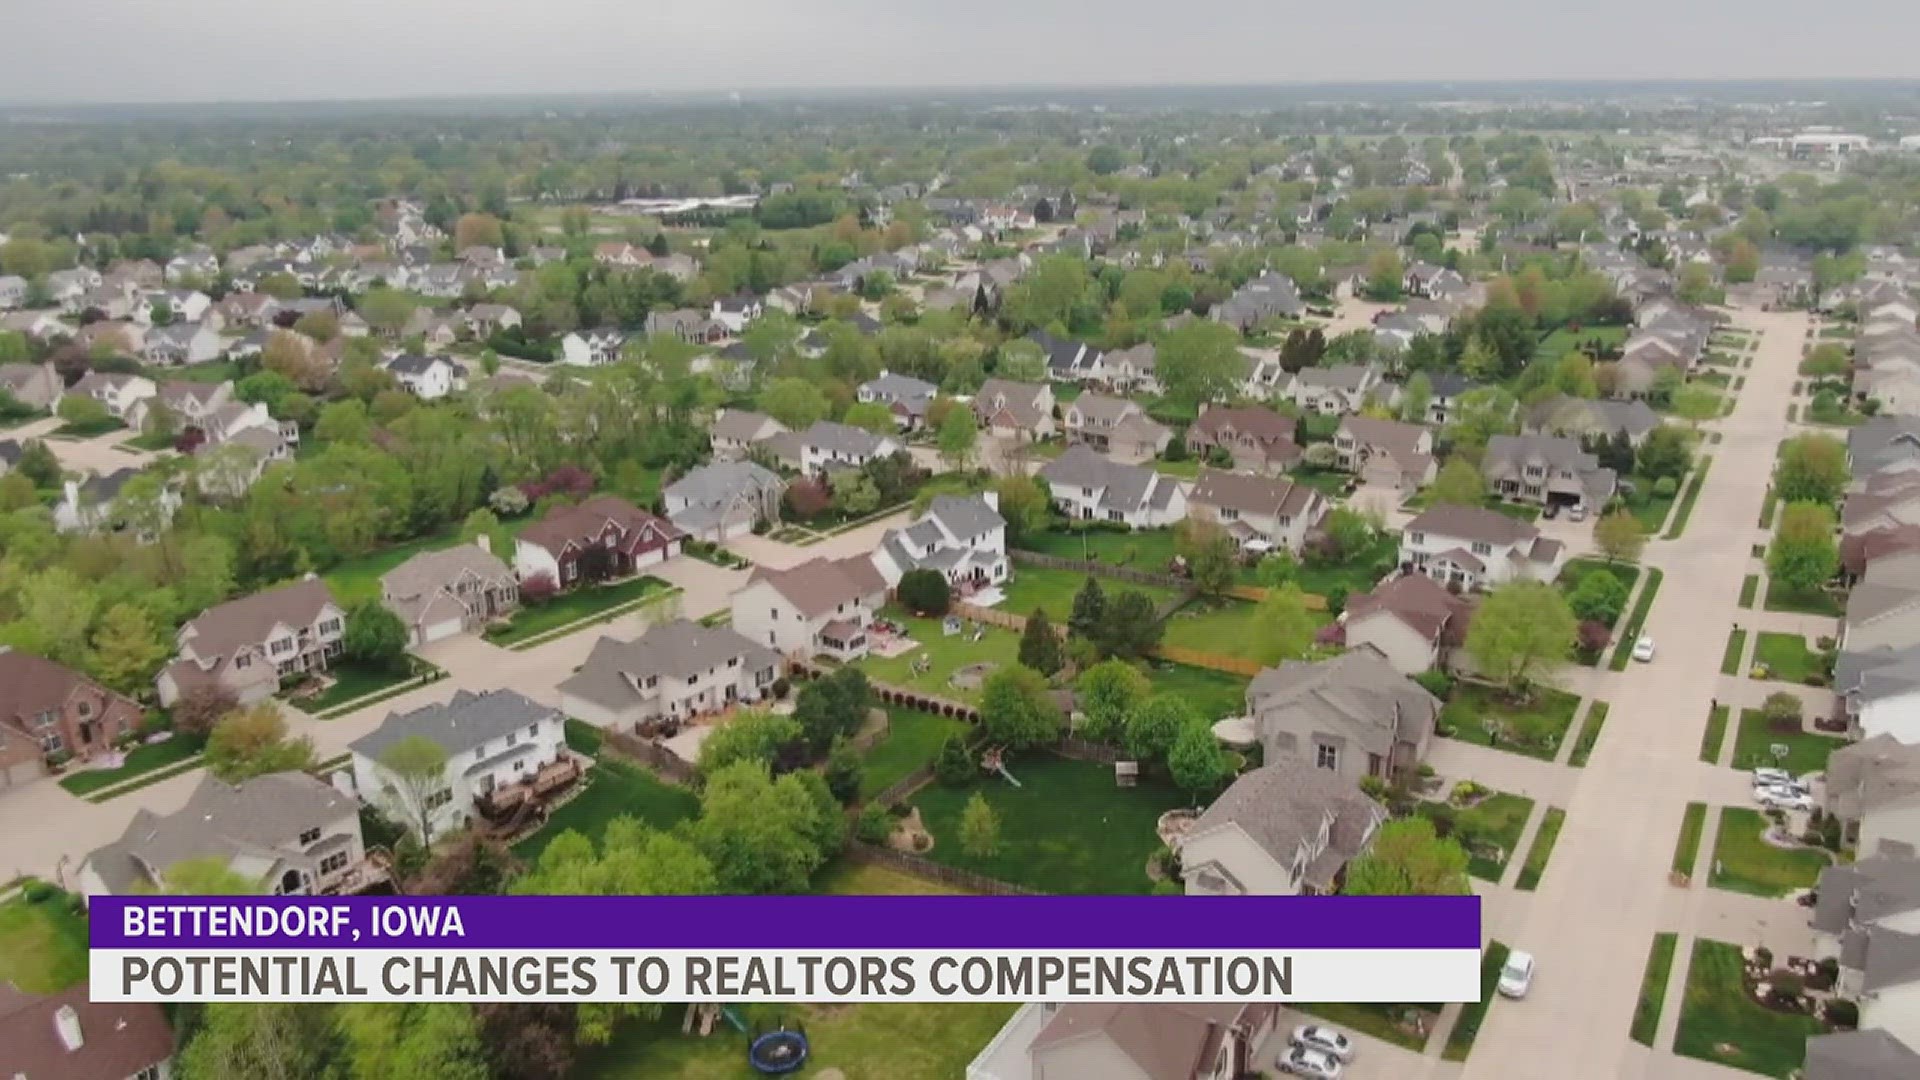 A powerful real estate trade group has agreed to pay $418 million and change its rules to settle lawsuits claiming homeowners are unfairly forced to pay commissions.